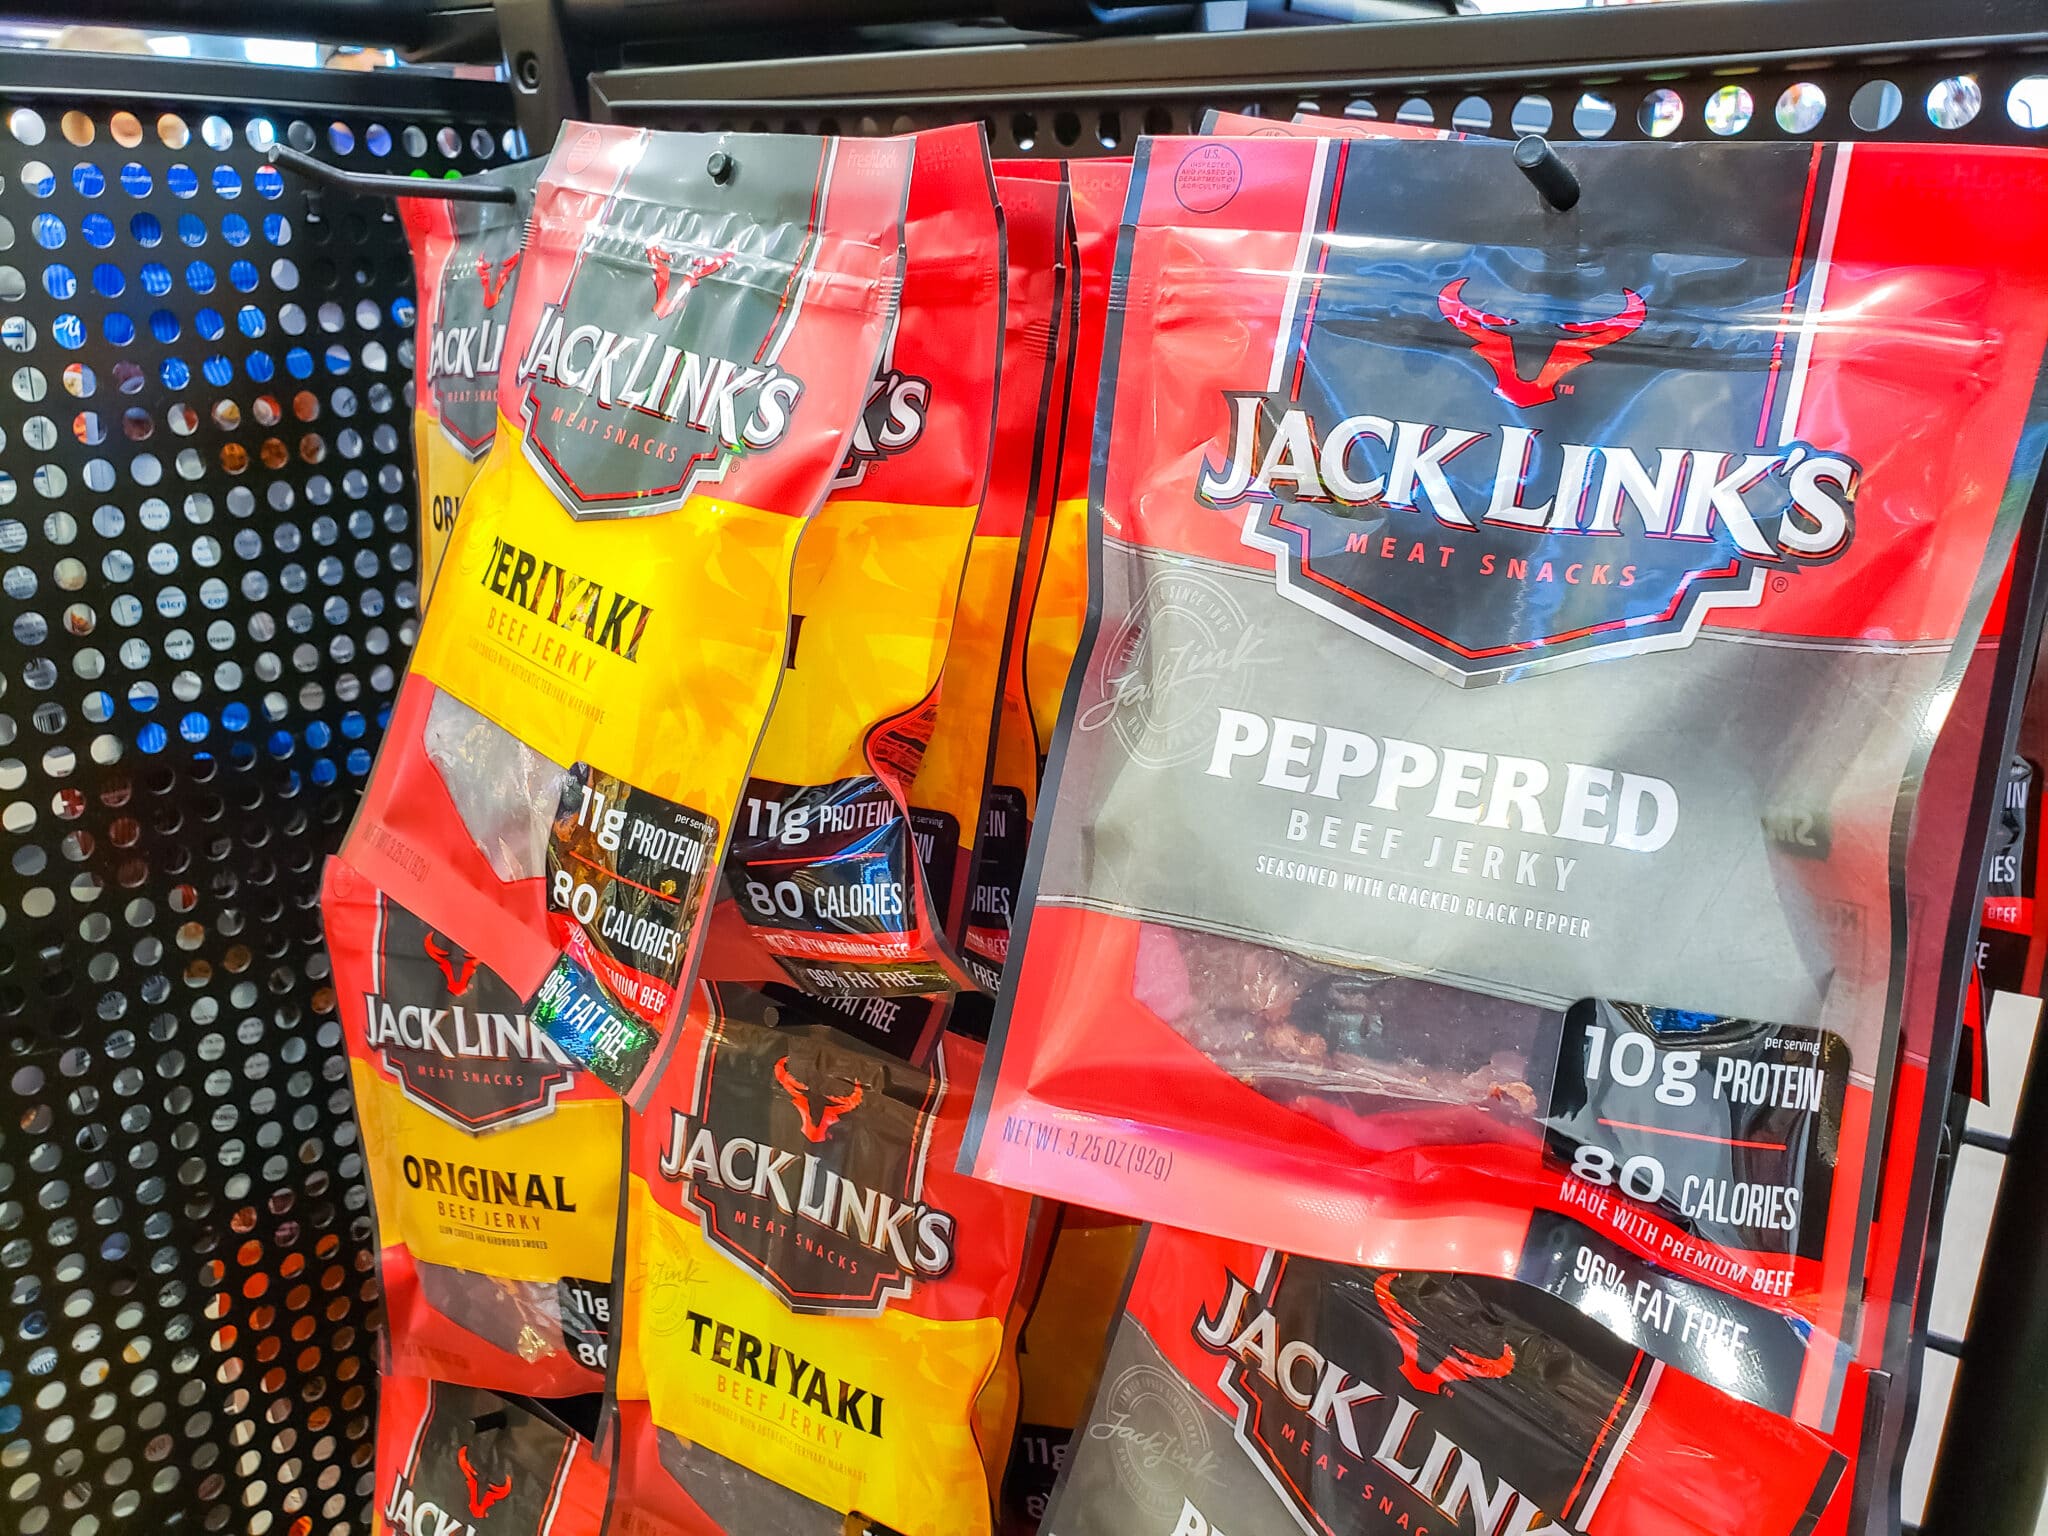 Jack Link's will create 800 jobs in Houston County